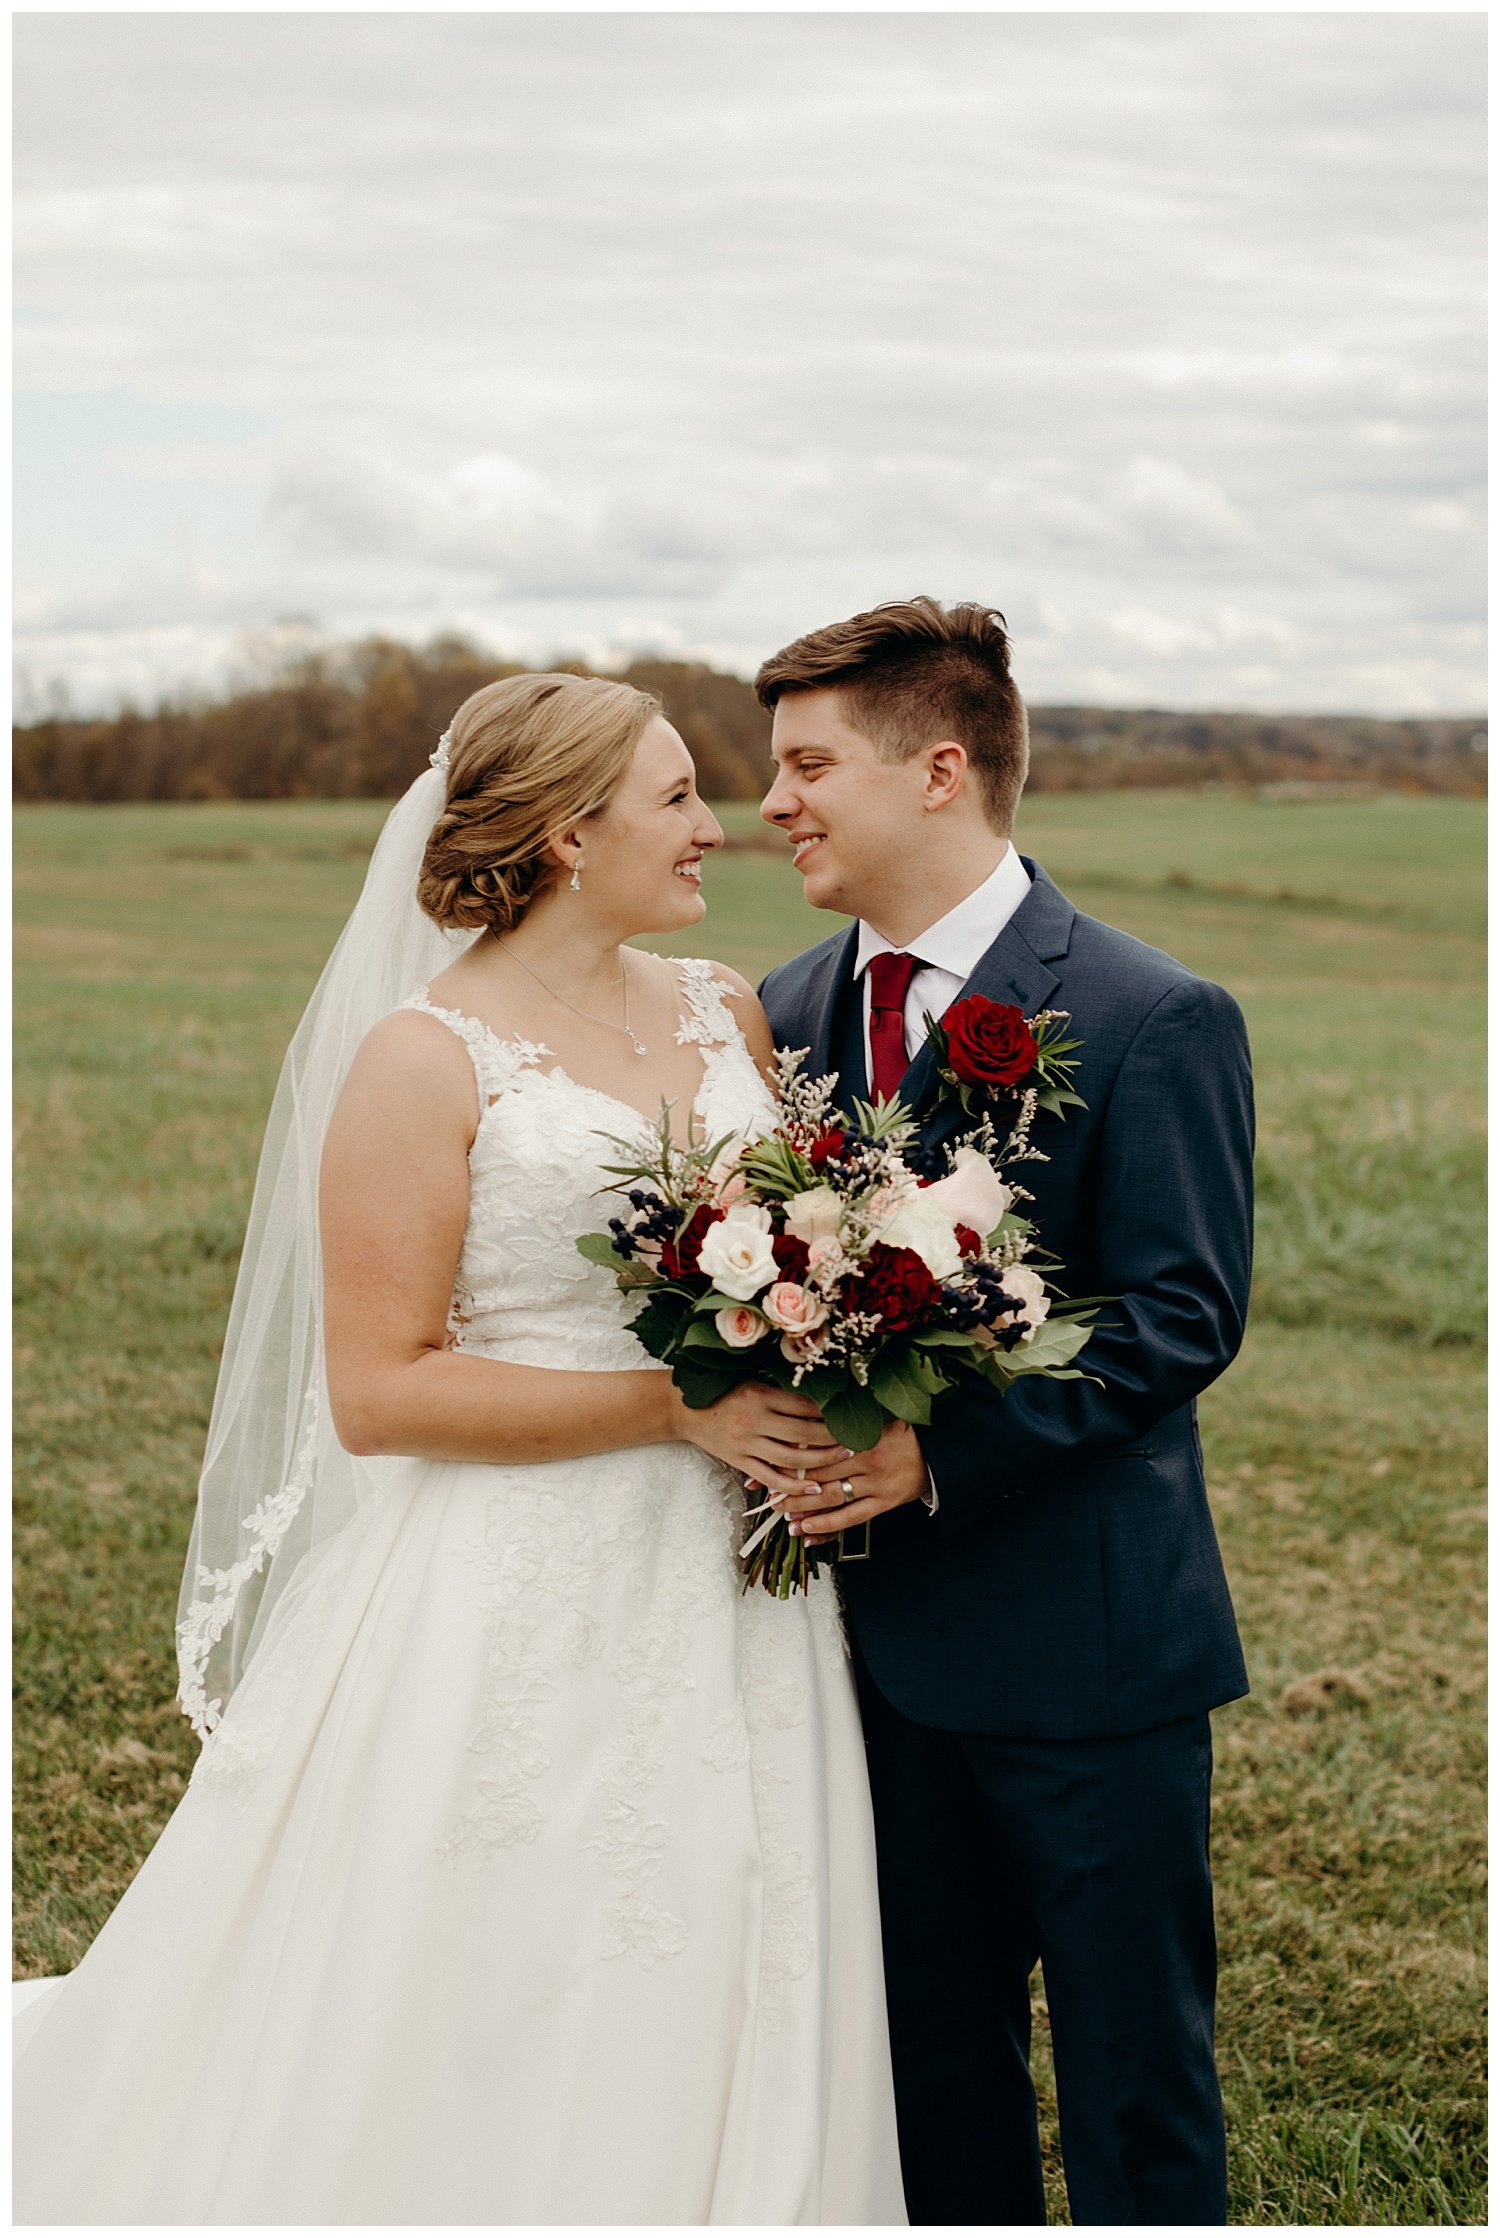  West Manor Estate in Forest, VA. Best wedding Photographers in Central Virginia. Candid Natural Posing Aesthetic and Photojournalistic Style Editing. 